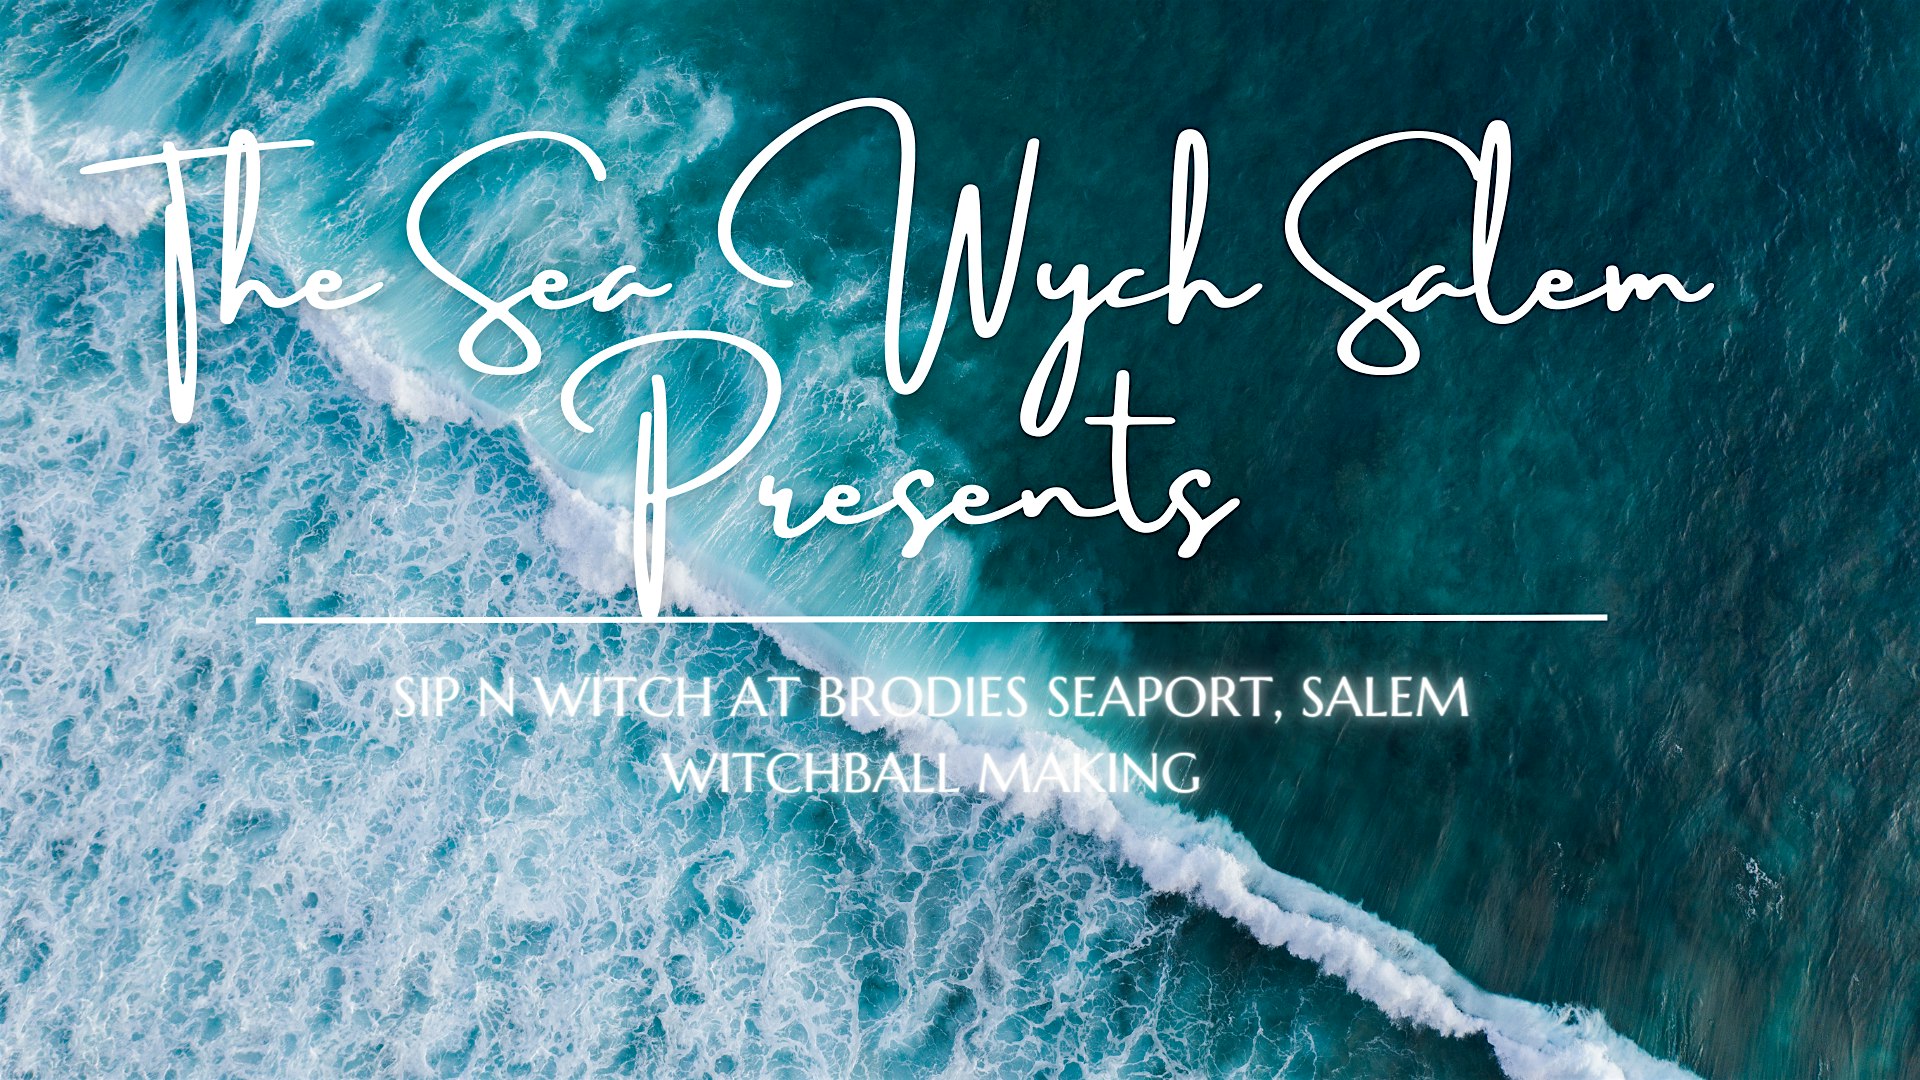 Check out our event 'The Sea Witch Salem' - it's sure to be a memorable experience. Get hands-on and make your very own witchball at Brodies Seaport in Salem, during our fun-filled 'Sip-n-Witch' time. All these in a set-up boasting an artistic backdrop of bird's-eye view ocean waves - designed to immerse you in the maritime ambiance. Don't miss out on this unique opportunity!